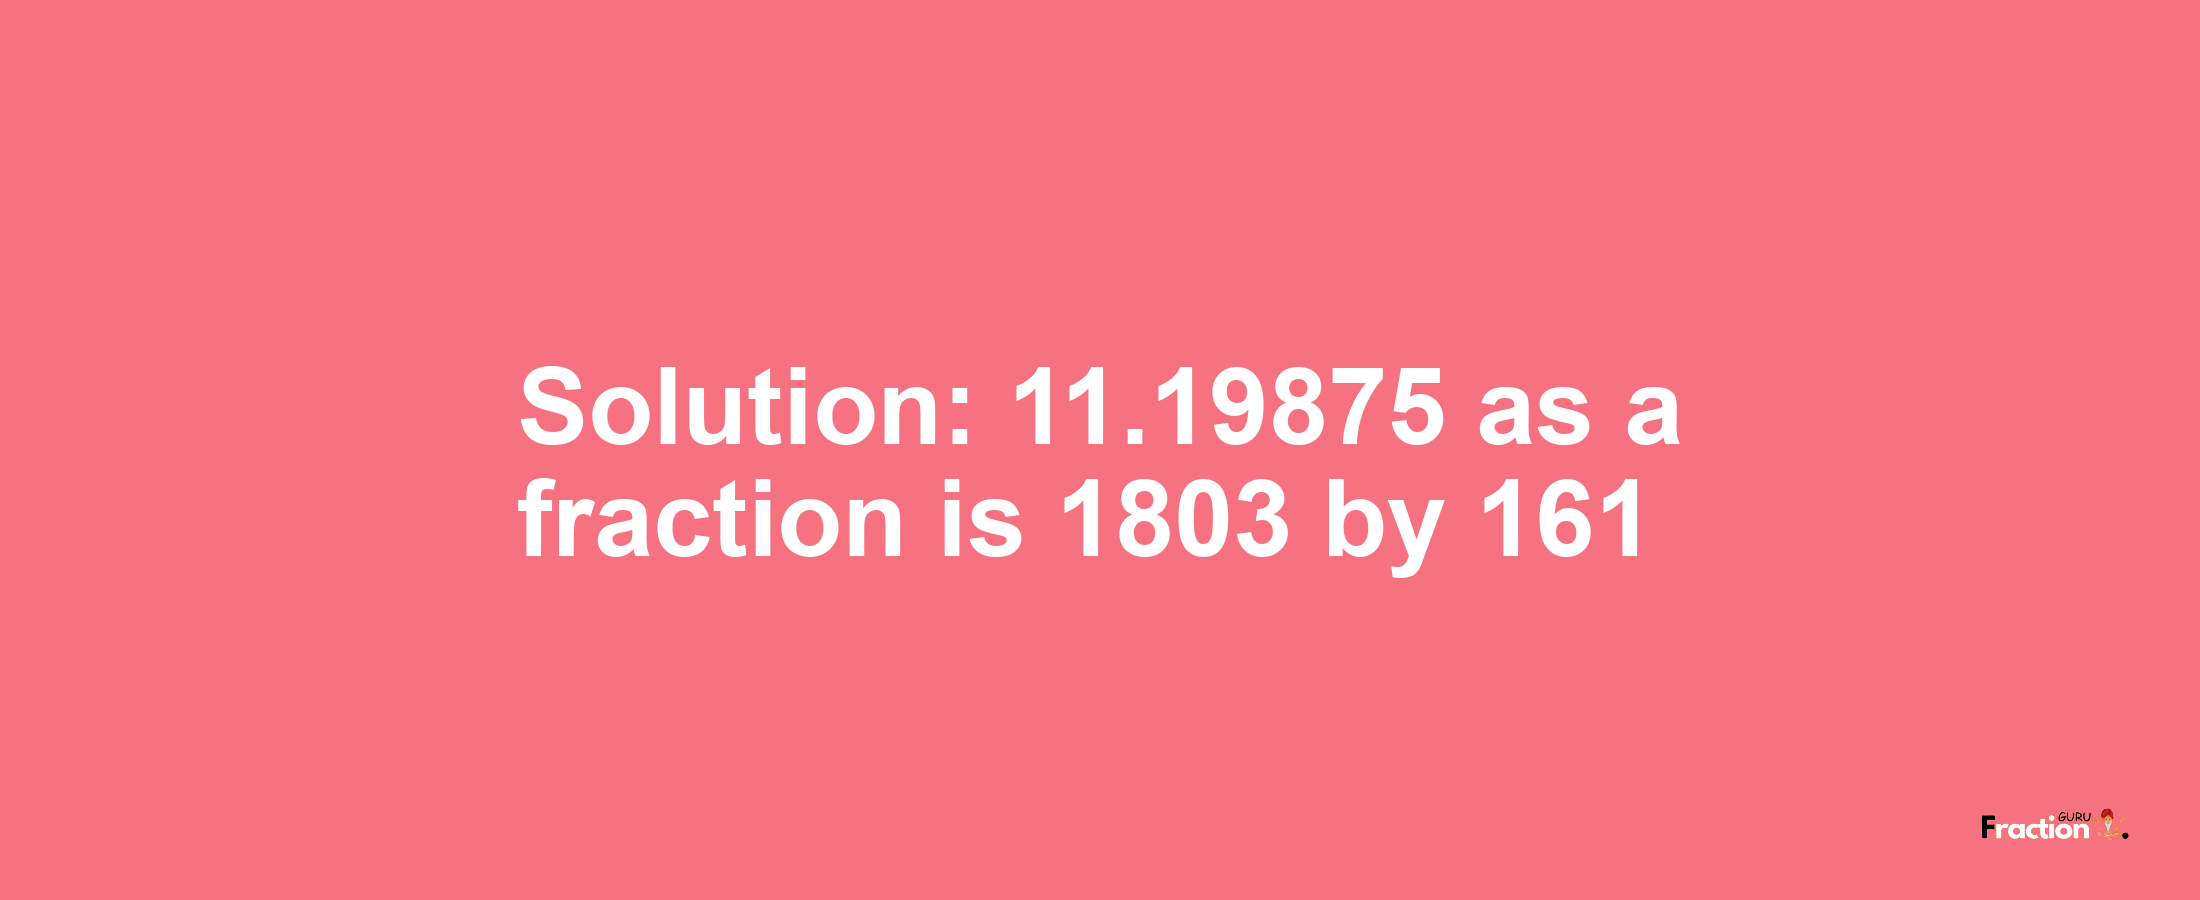 Solution:11.19875 as a fraction is 1803/161